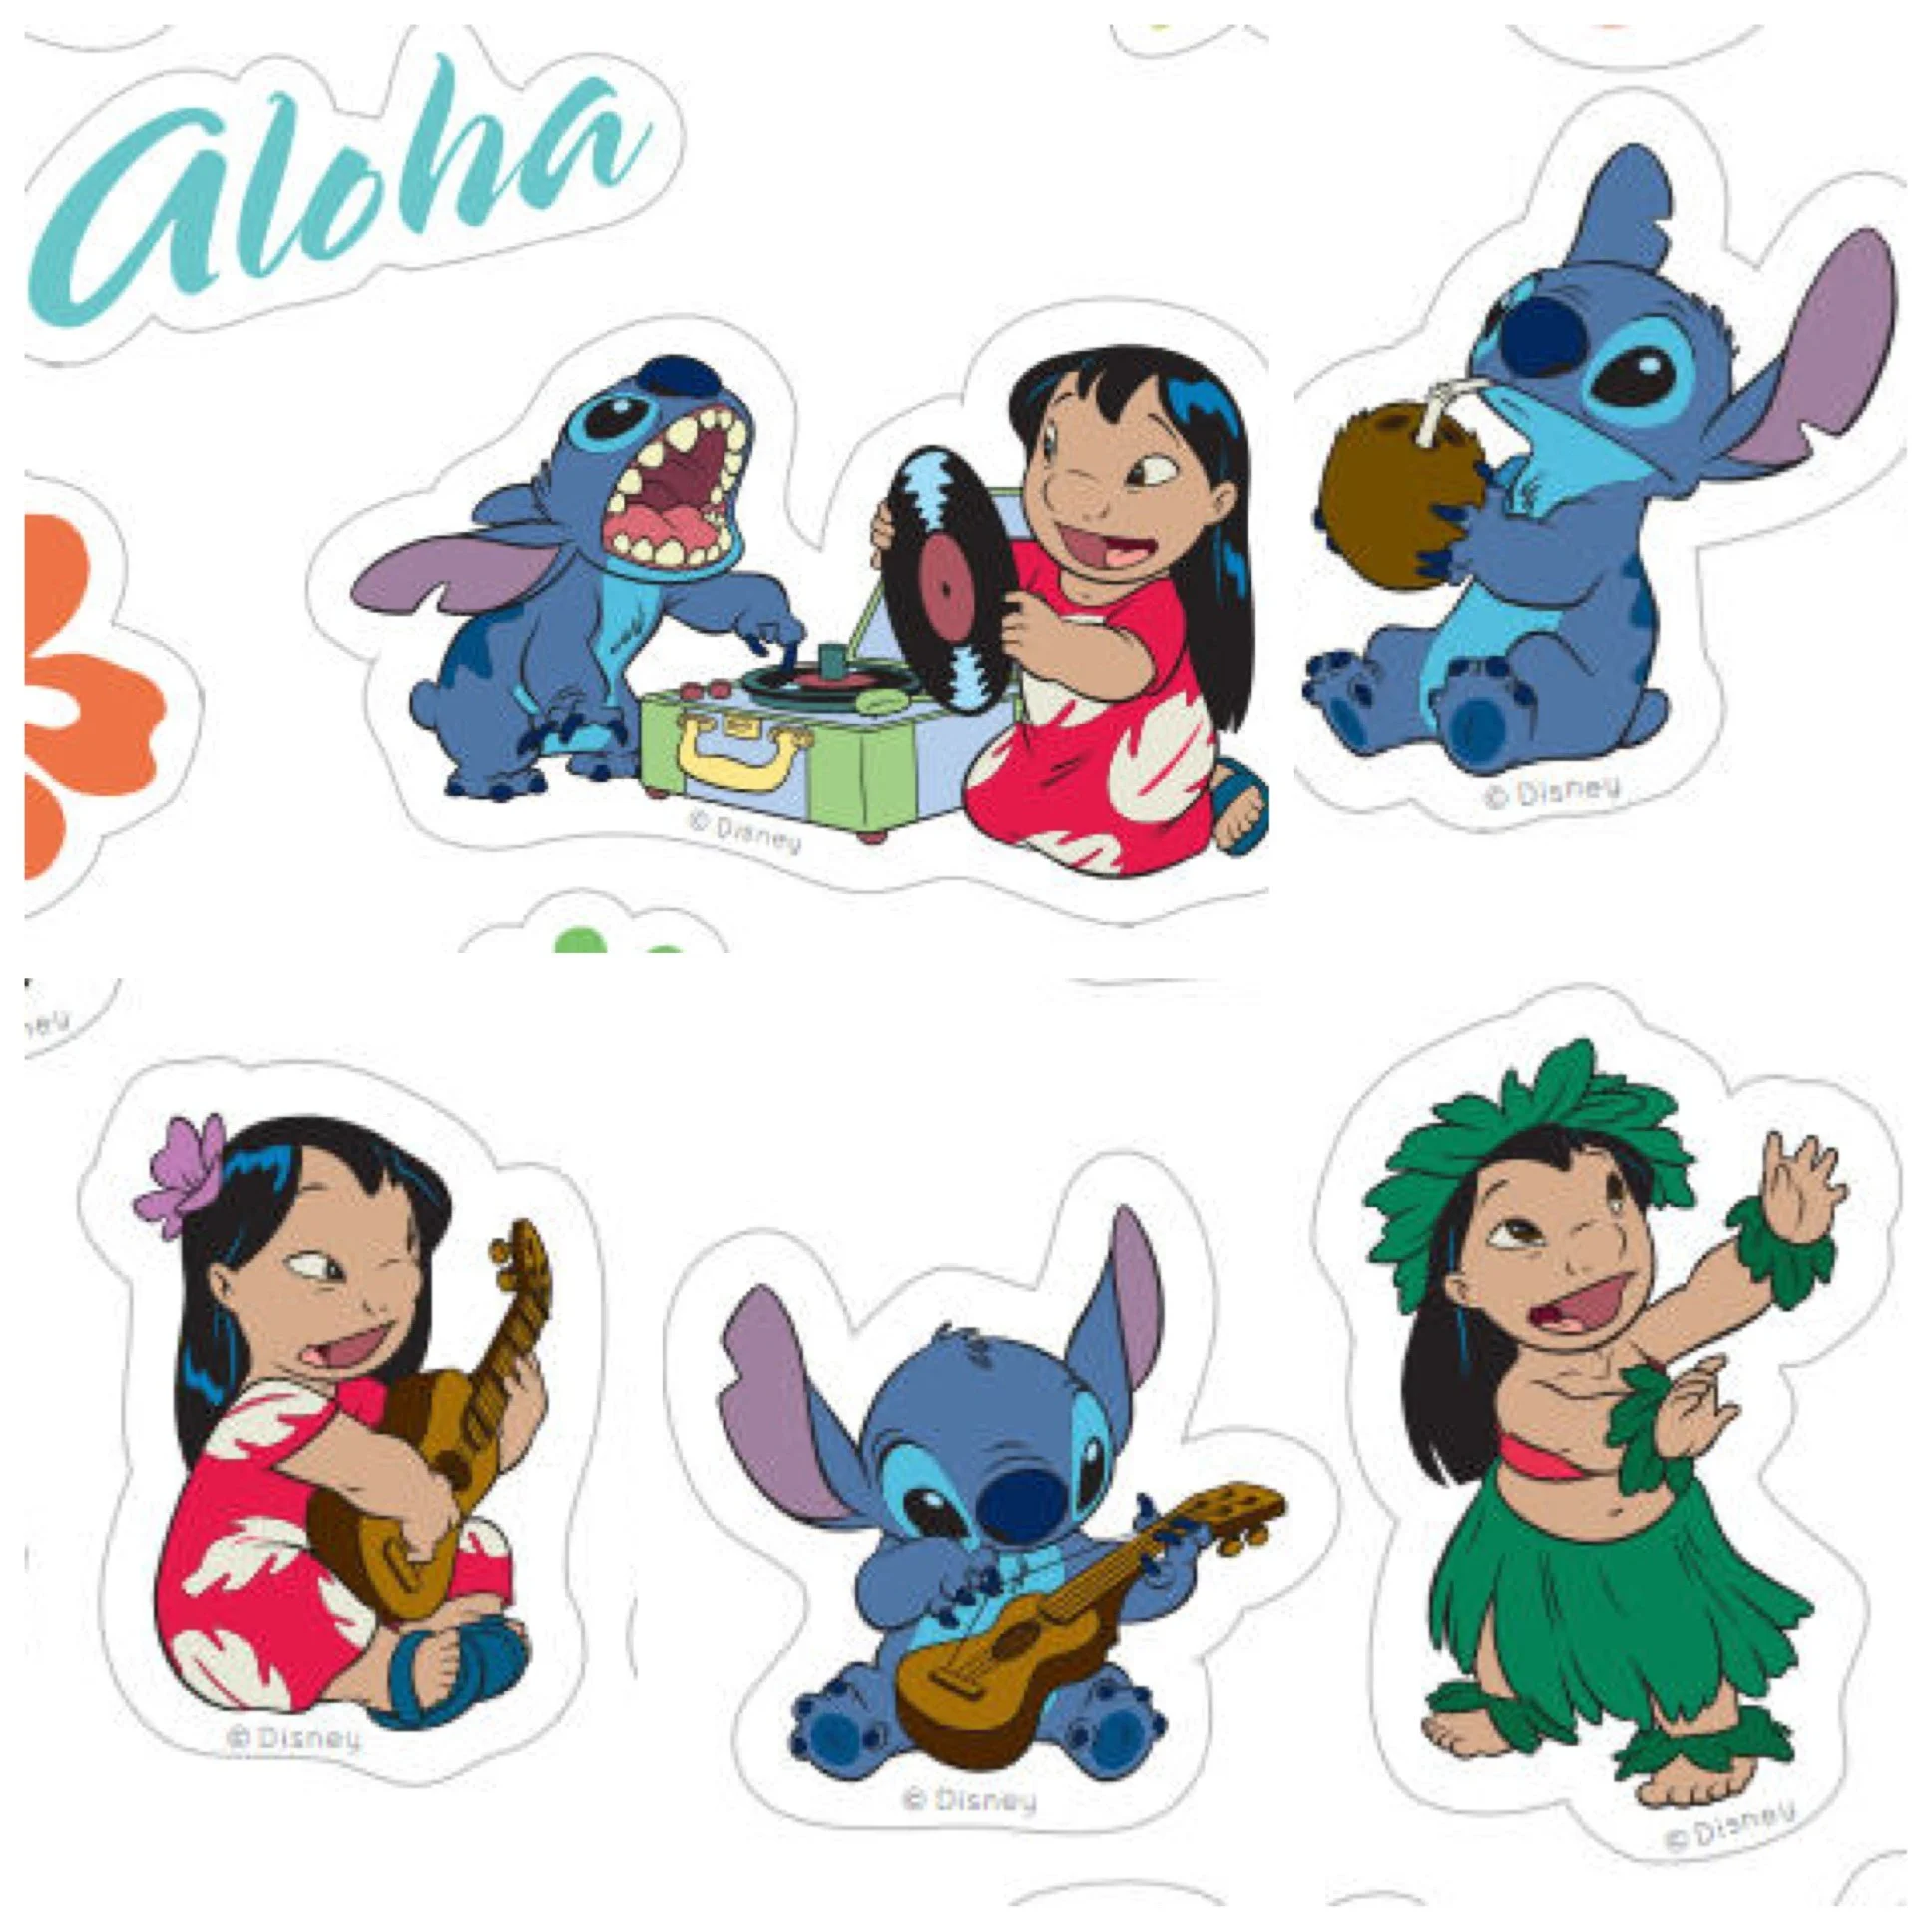 Print and share these adorable Lilo & Stitch stickers from home.